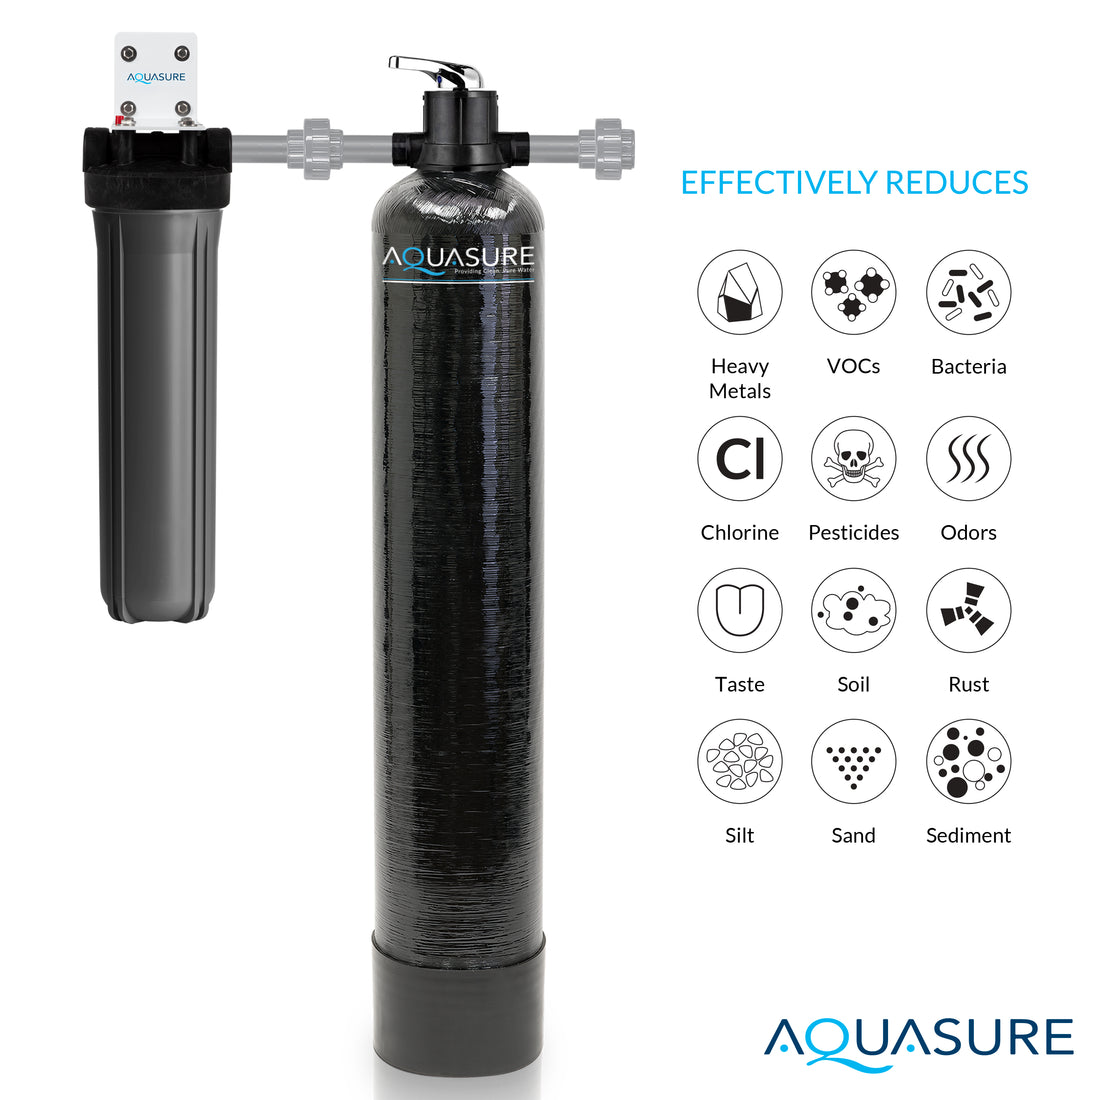 Signature Elite | Whole House Water Treatment System with Fine Mesh Resin and KDF85 Carbon Media and 18 GPM High Output Quantum UV De-Activator System